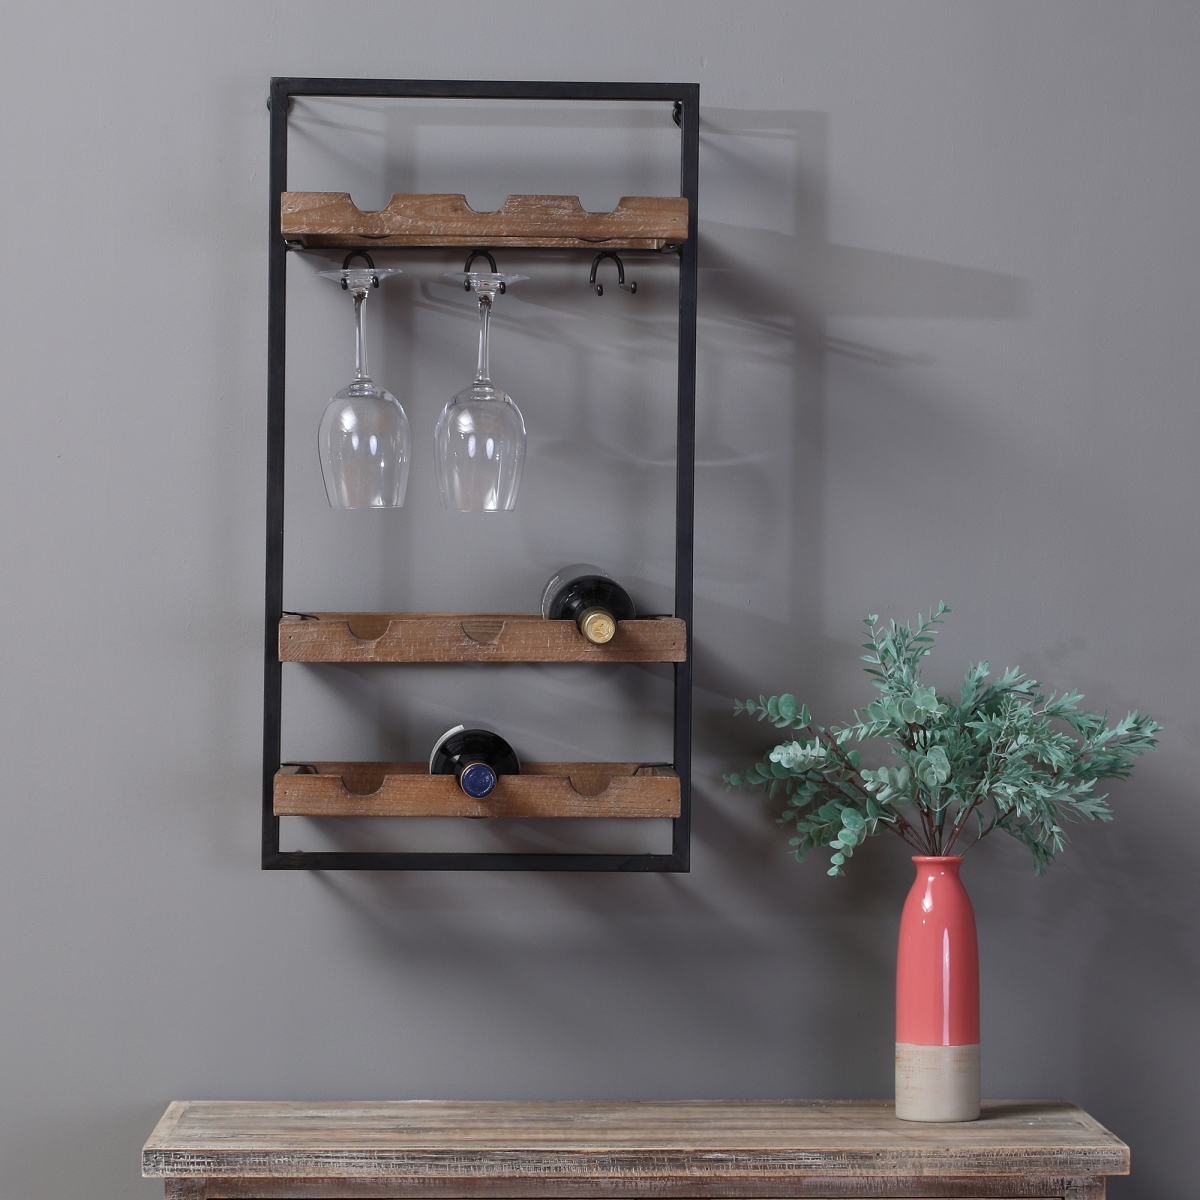 Luxen Home Whif368 27 In. Wall Mounted Wooden Wine Rack - Black